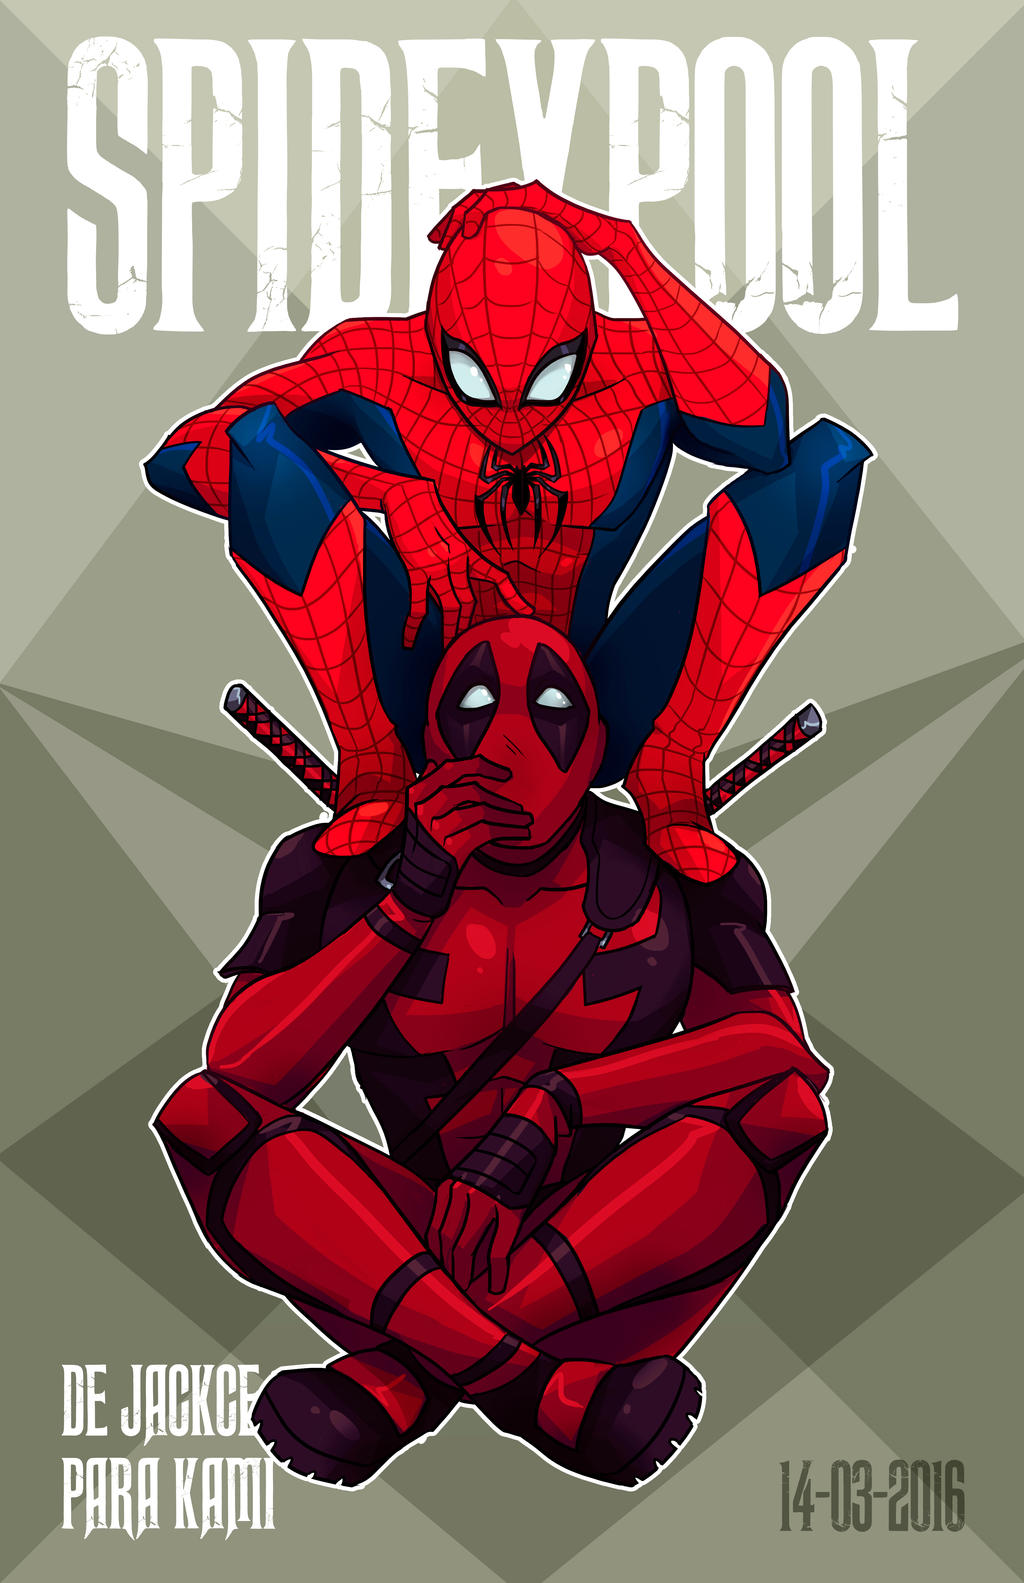 spideypool_for_the_love_by_jackce_art-d9v5xk6.jpg